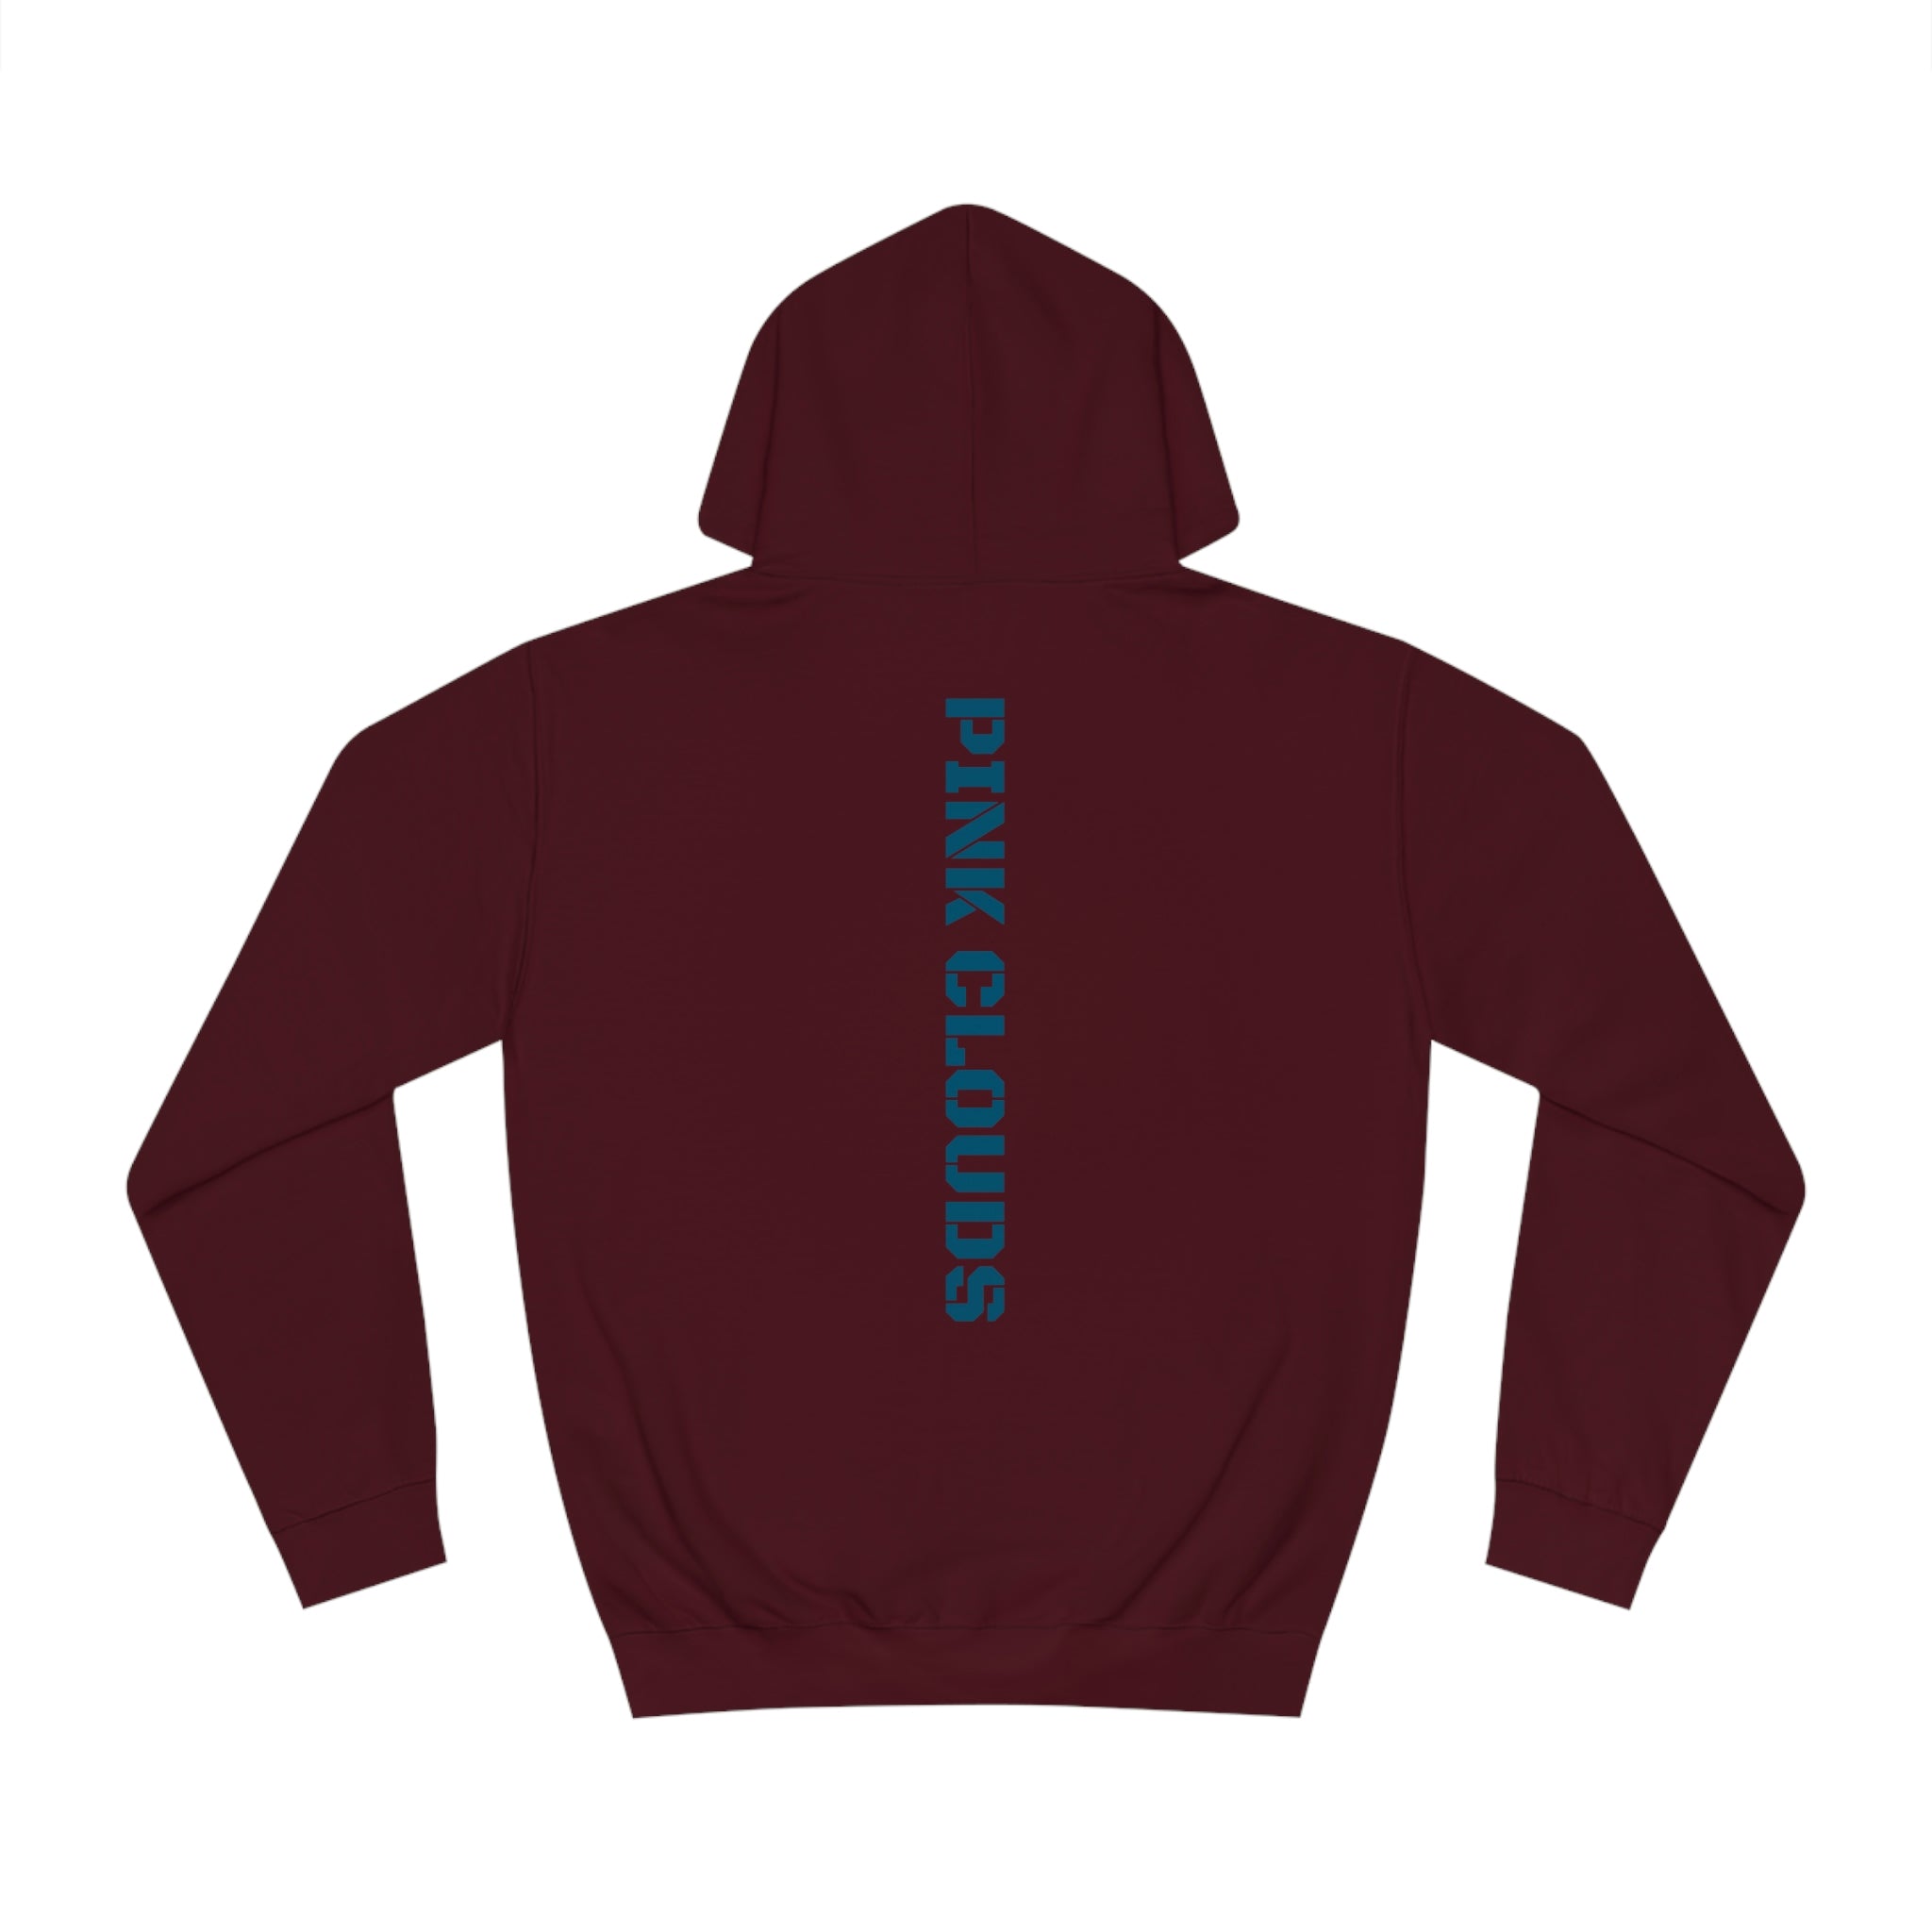 Positive thoughts - Unisex College Hoodie